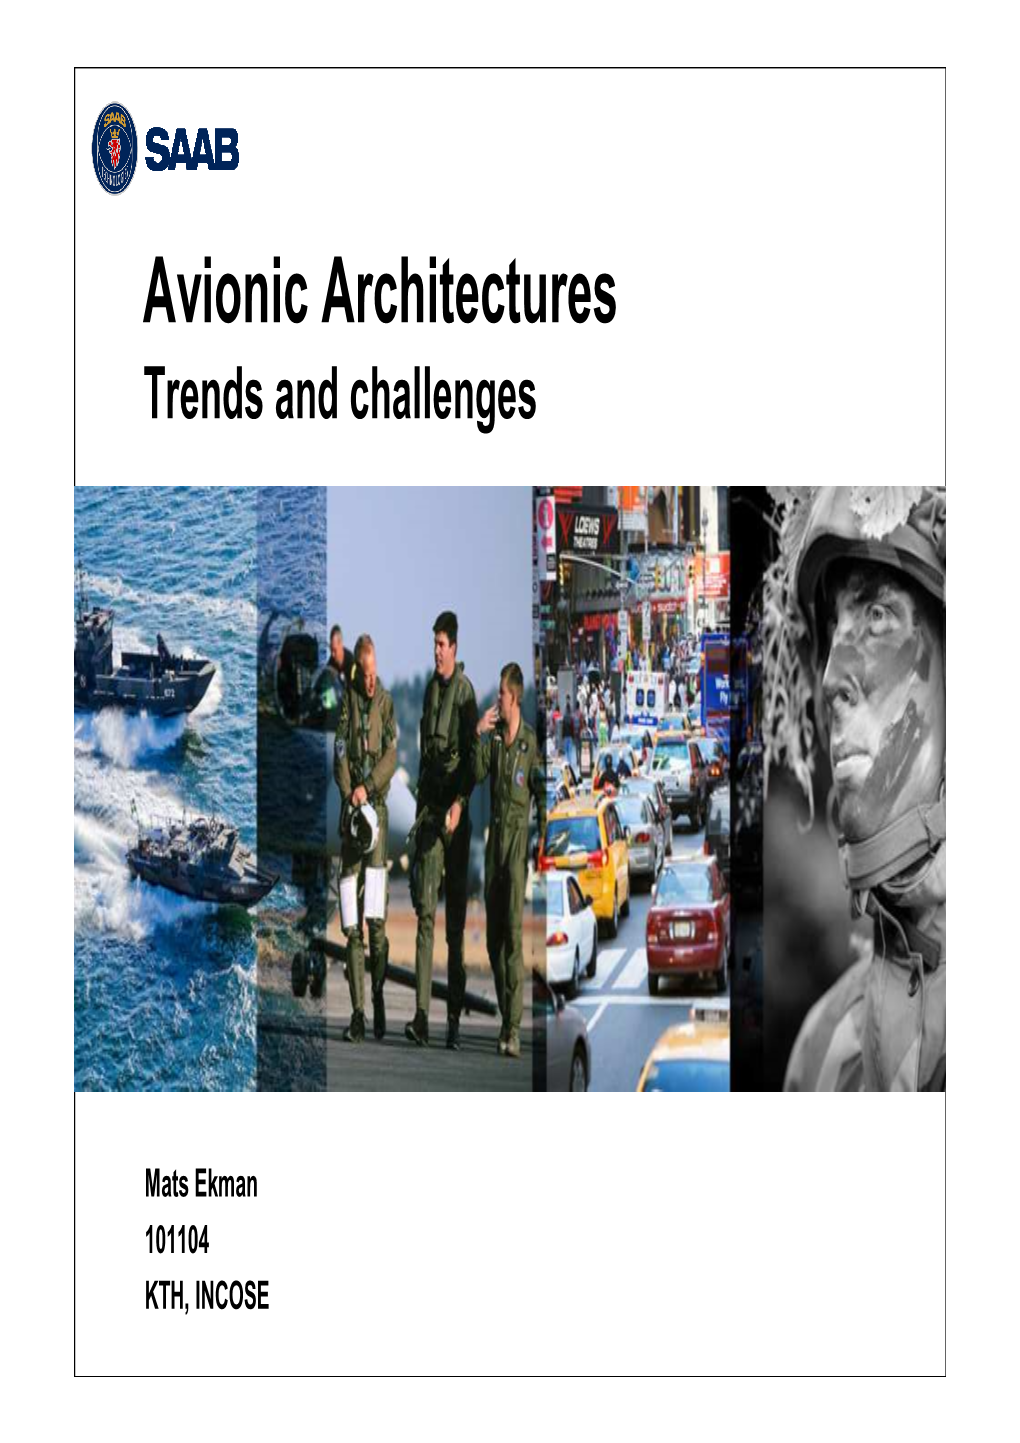 Avionic Architectures Trends and Challenges